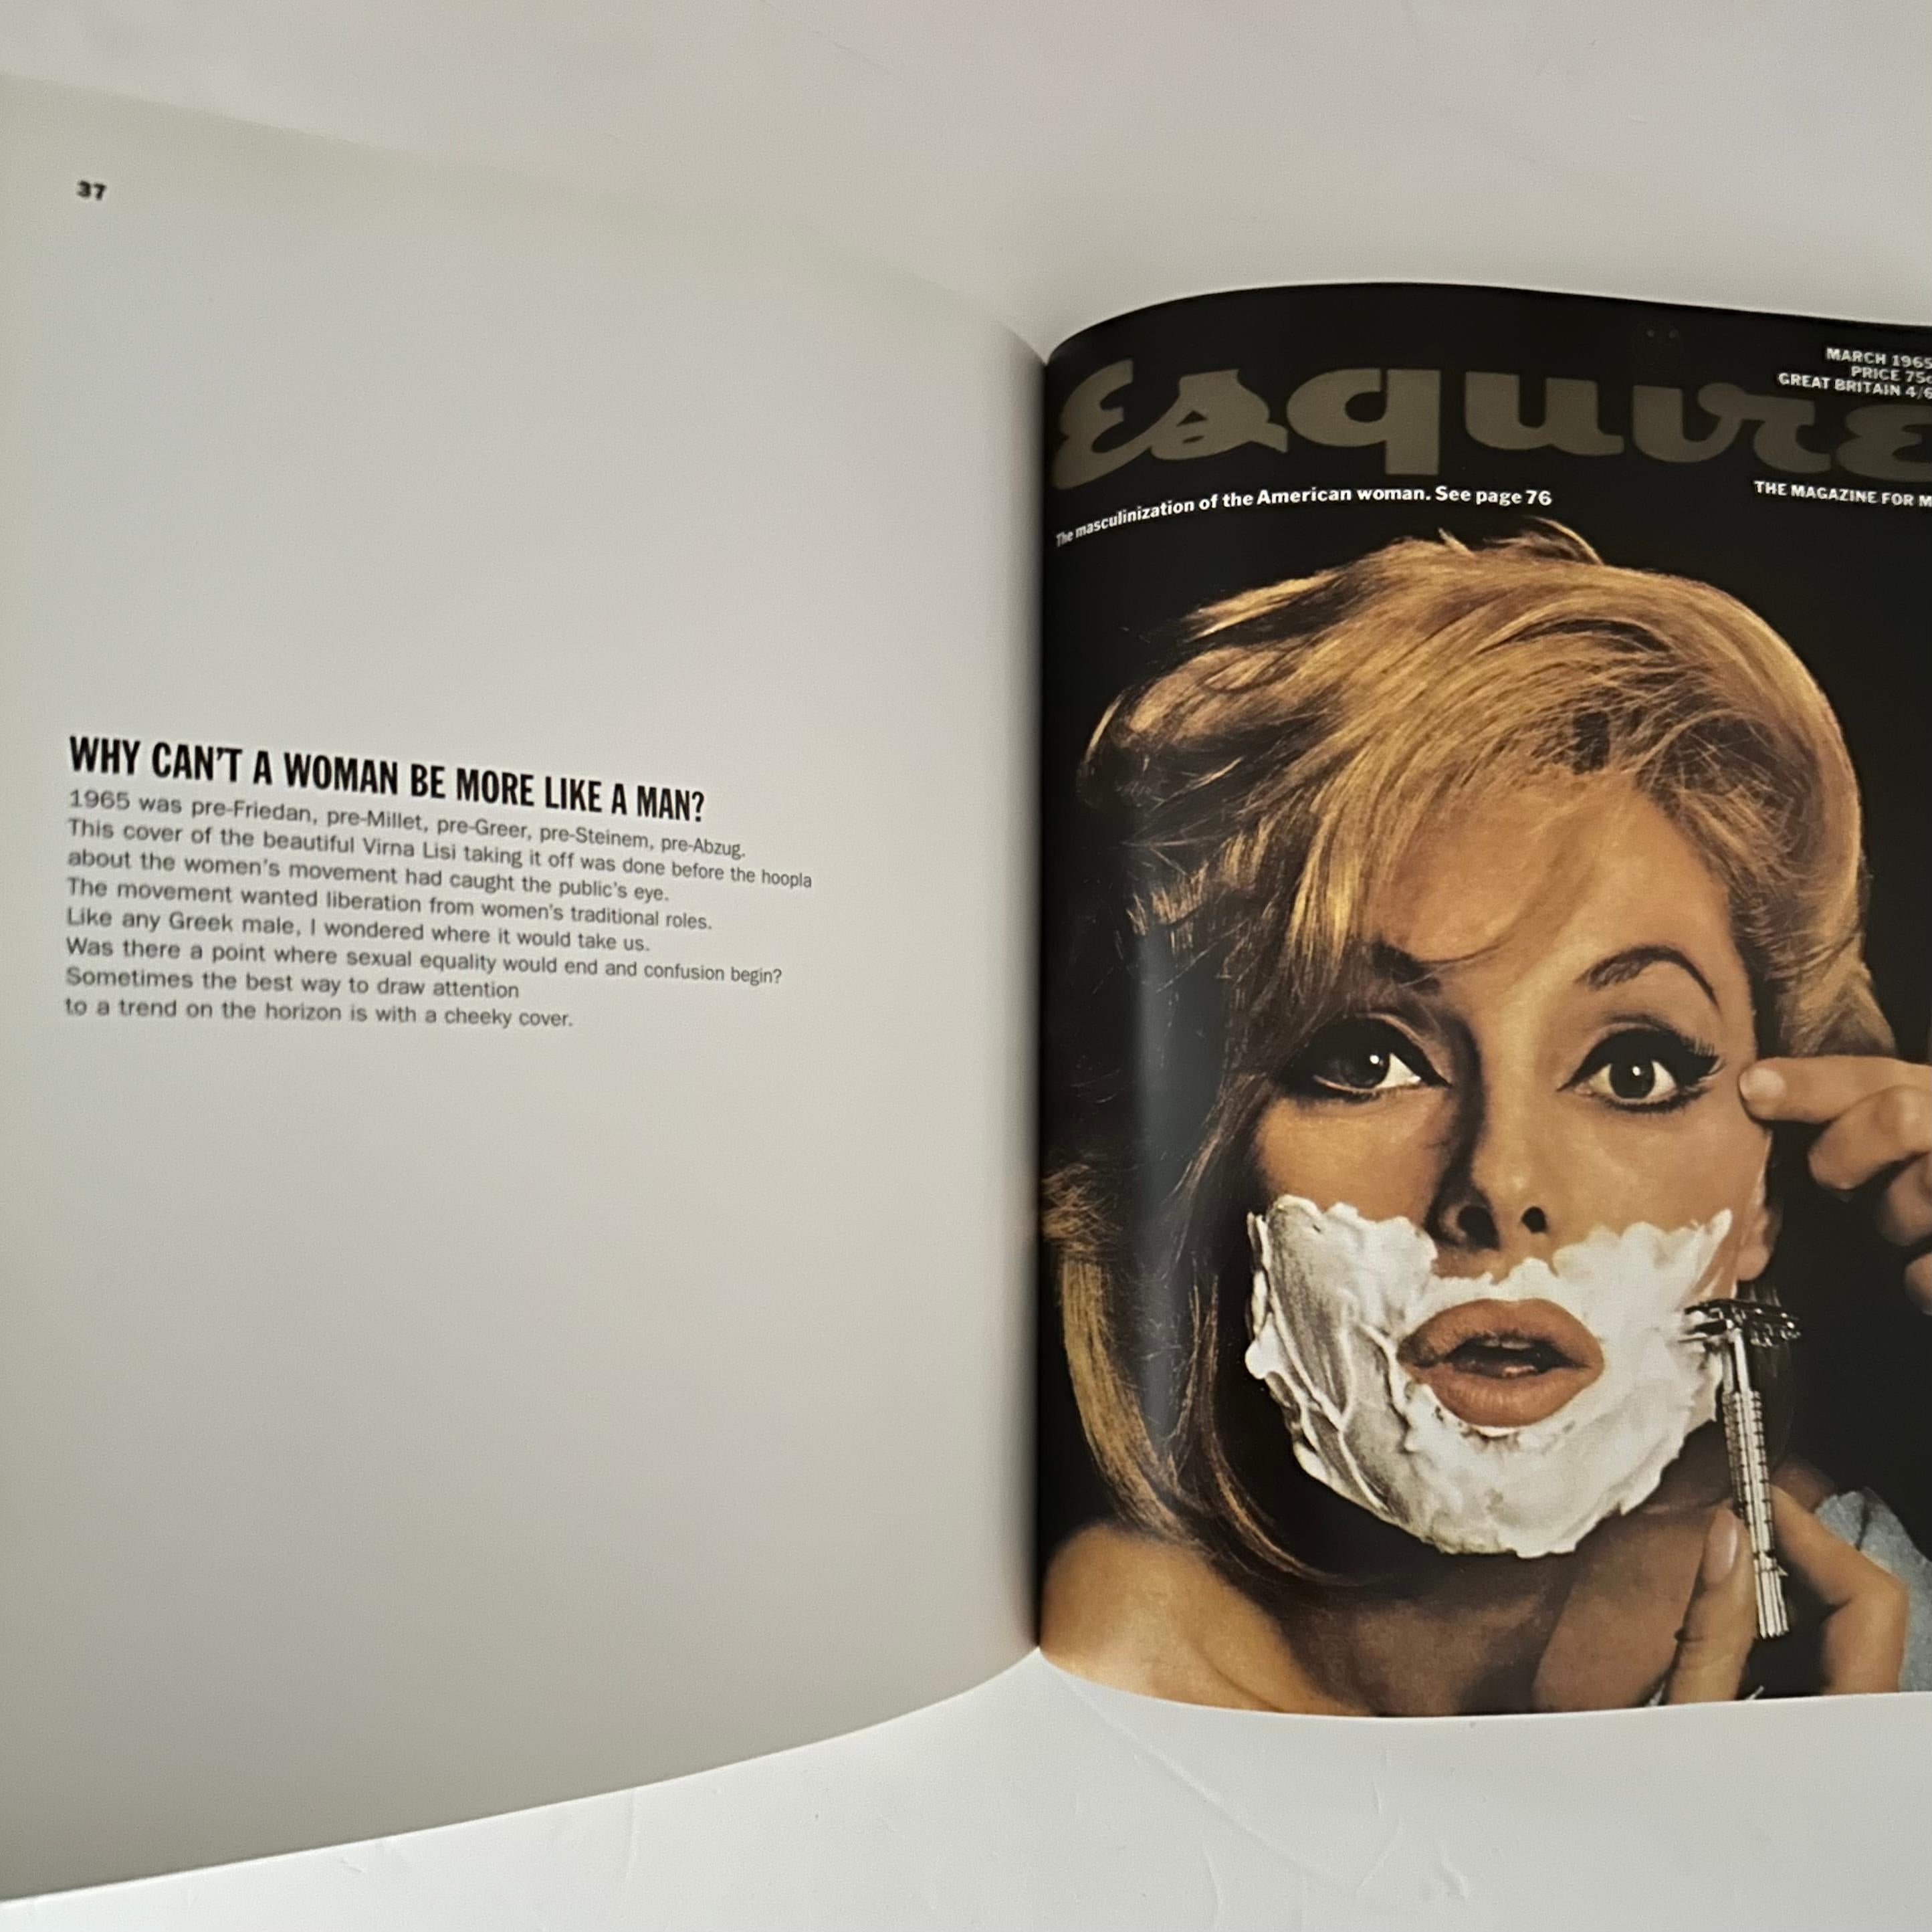 Covering the '60s: George Lois, The Esquire Era - 1st edition, New York, 1996 2